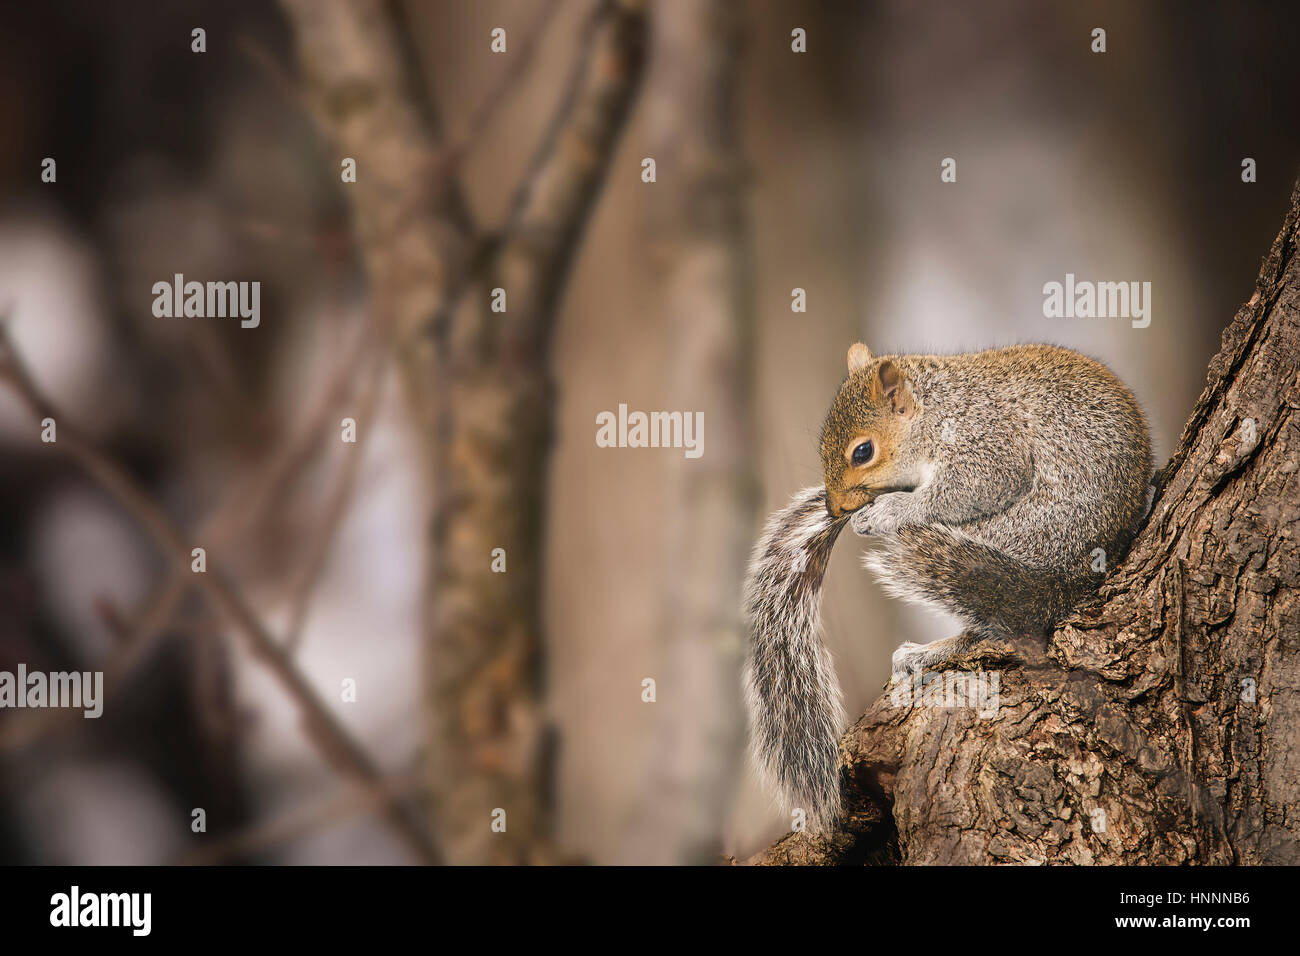 Close-up of squirrel biting tail while sitting on tree trunk Stock Photo